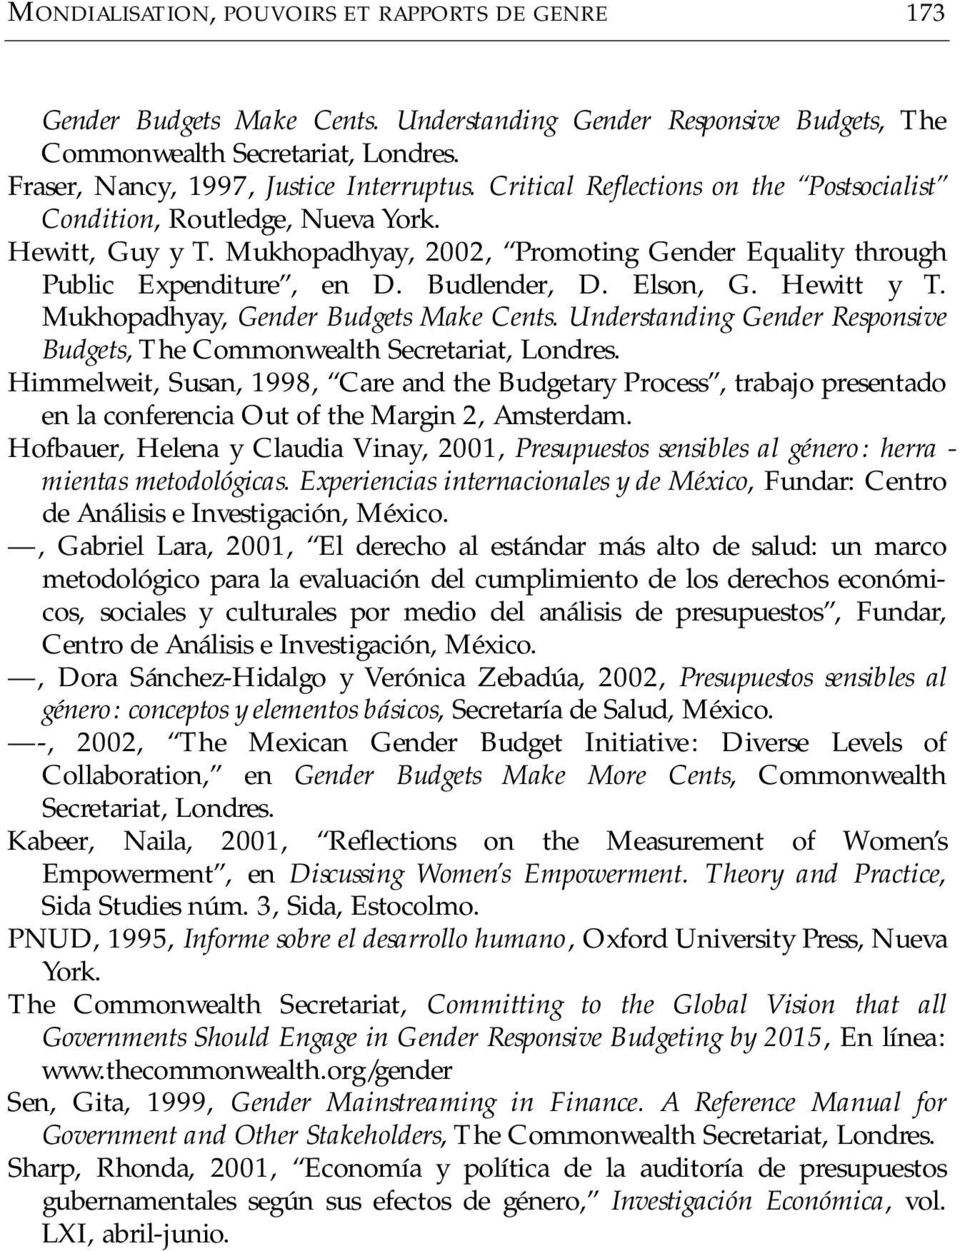 Mukhopadhyay, 2002, Promoting Gender Equality through Public Expenditure, en D. Budlender, D. Elson, G. Hewitt y T. Mukhopadhyay, Gender Budgets Make Cents.